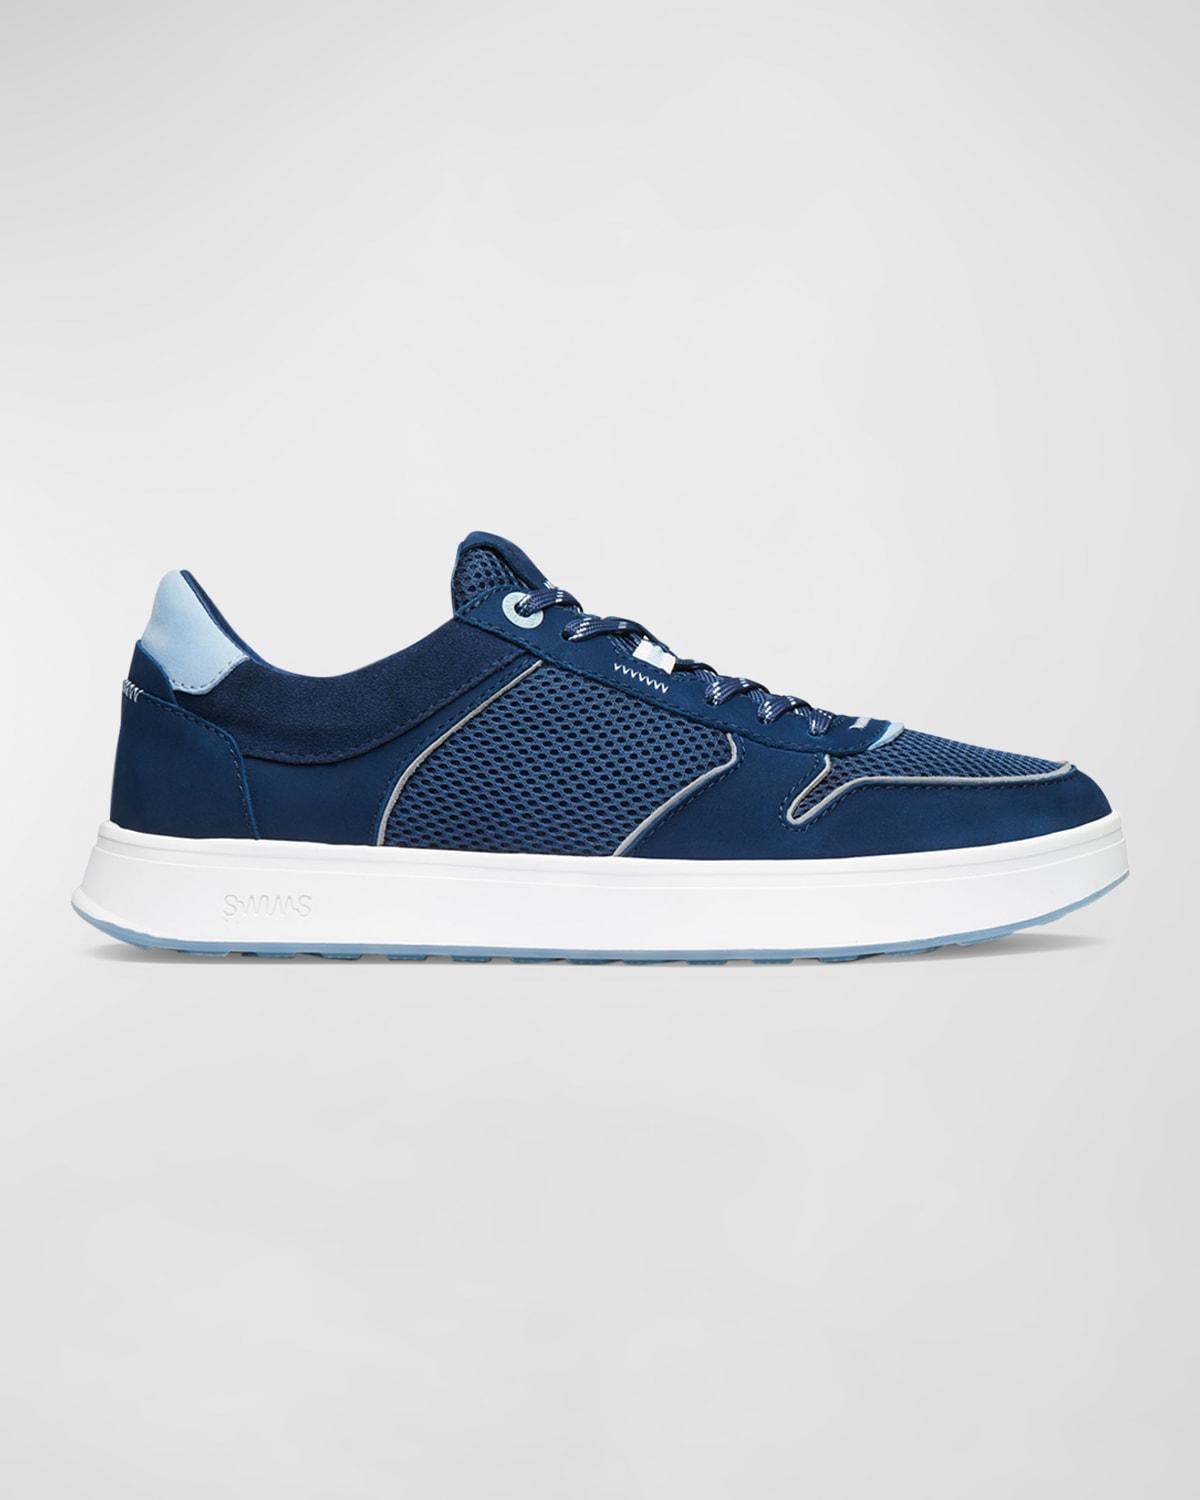 Men's Strada Mix-Leather and Mesh Sneakers Product Image